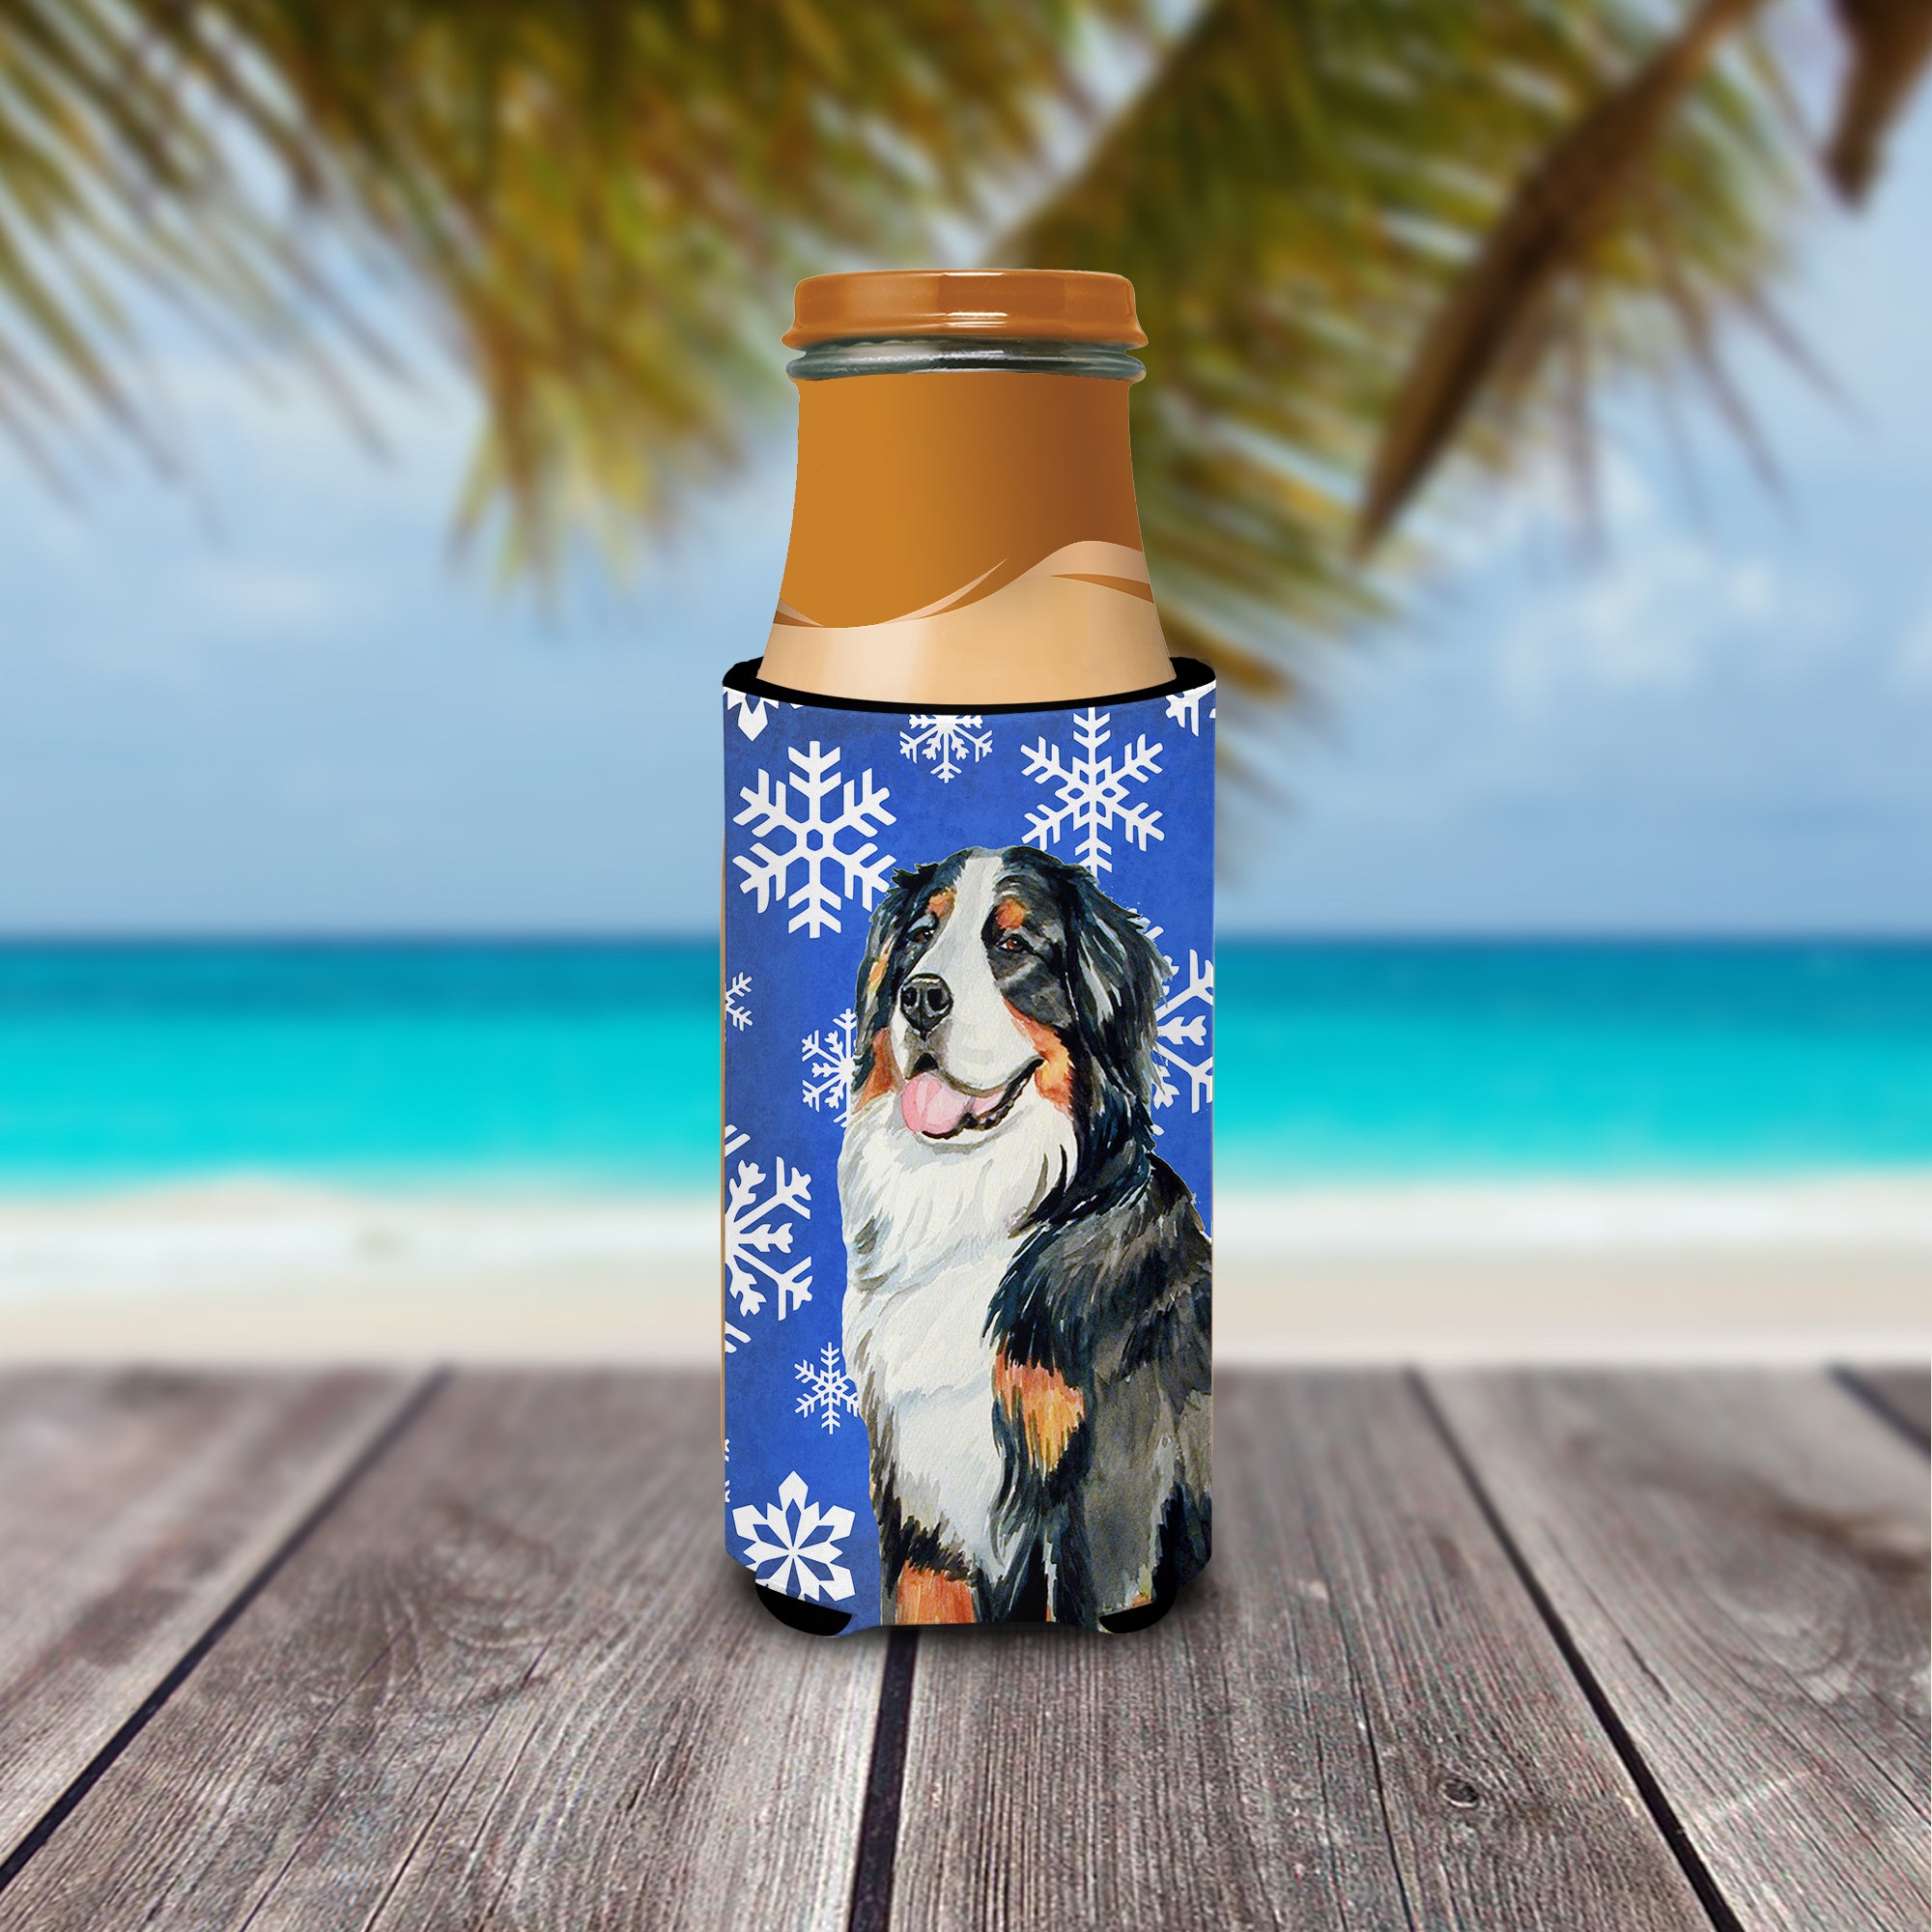 Bernese Mountain Dog Winter Snowflakes Holiday Ultra Beverage Insulators for slim cans LH9289MUK